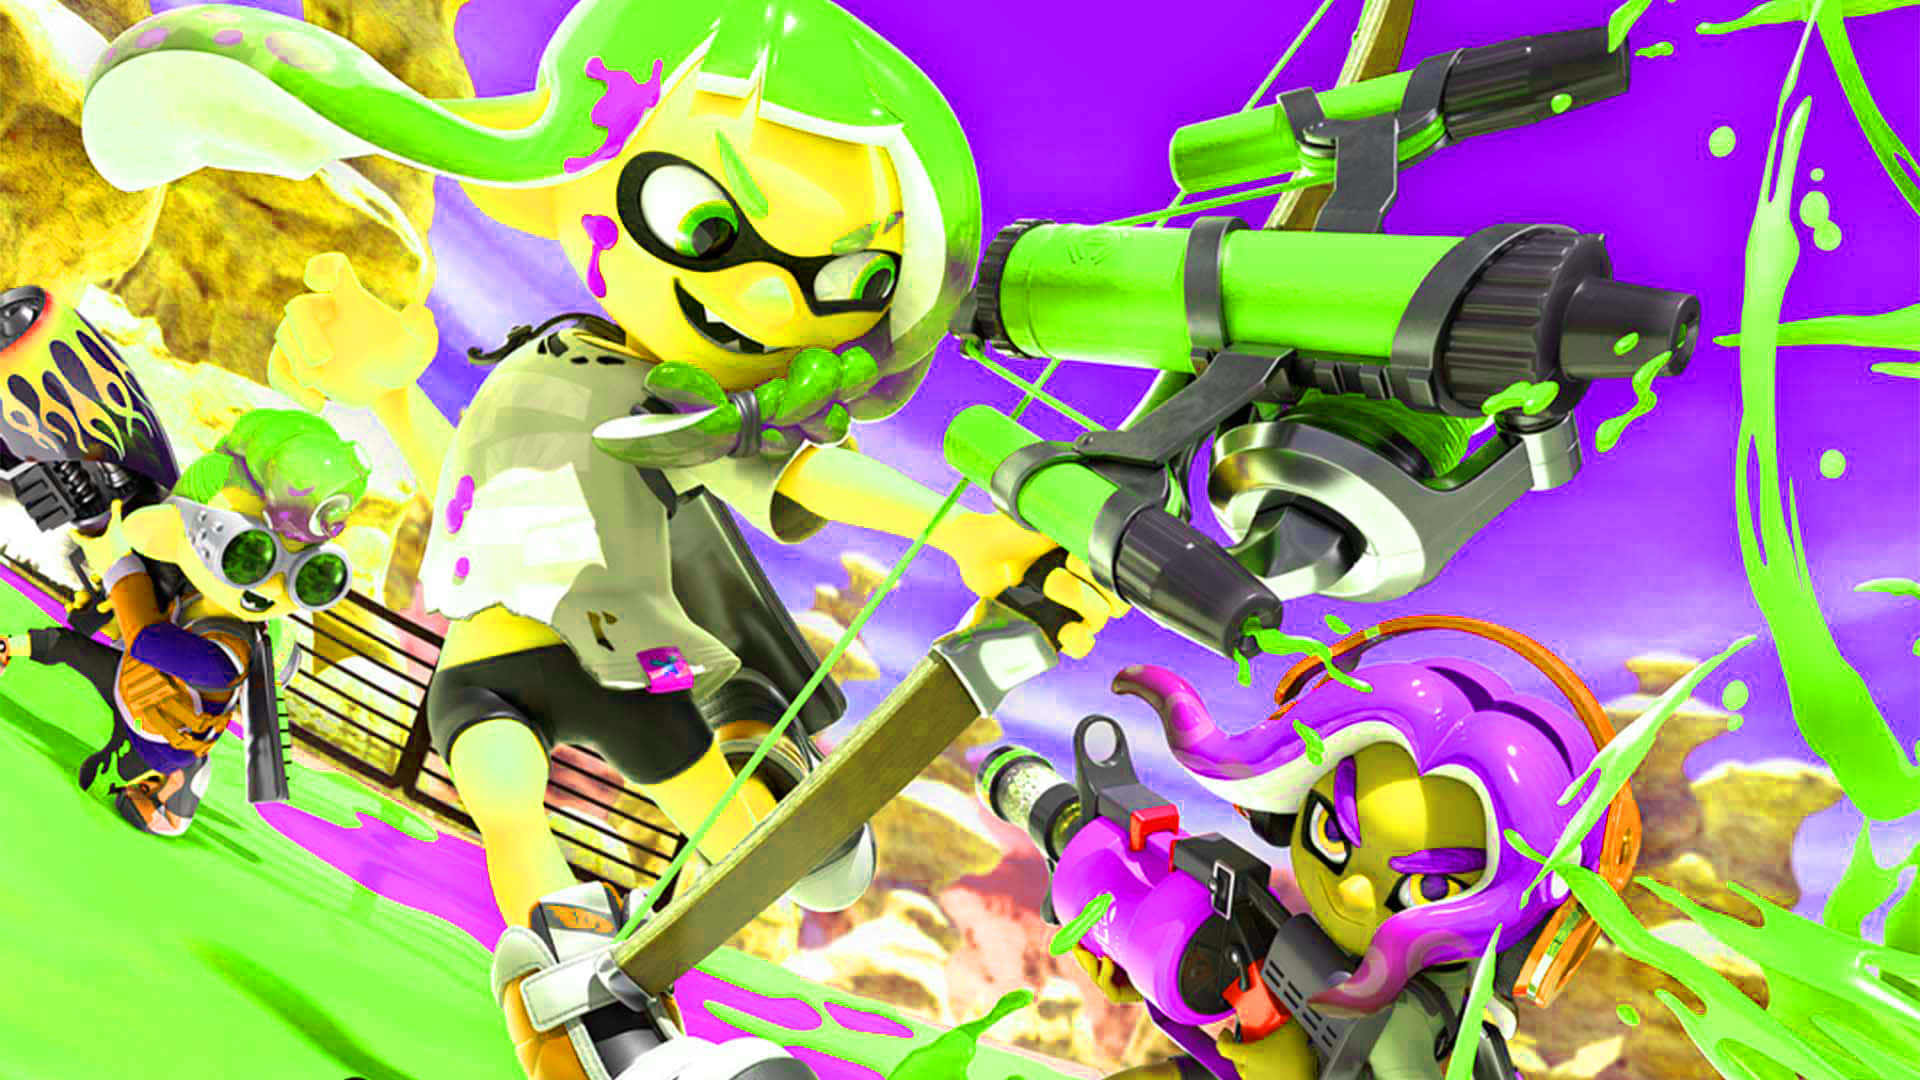 Enter the world of Splatoon, where ink reigns